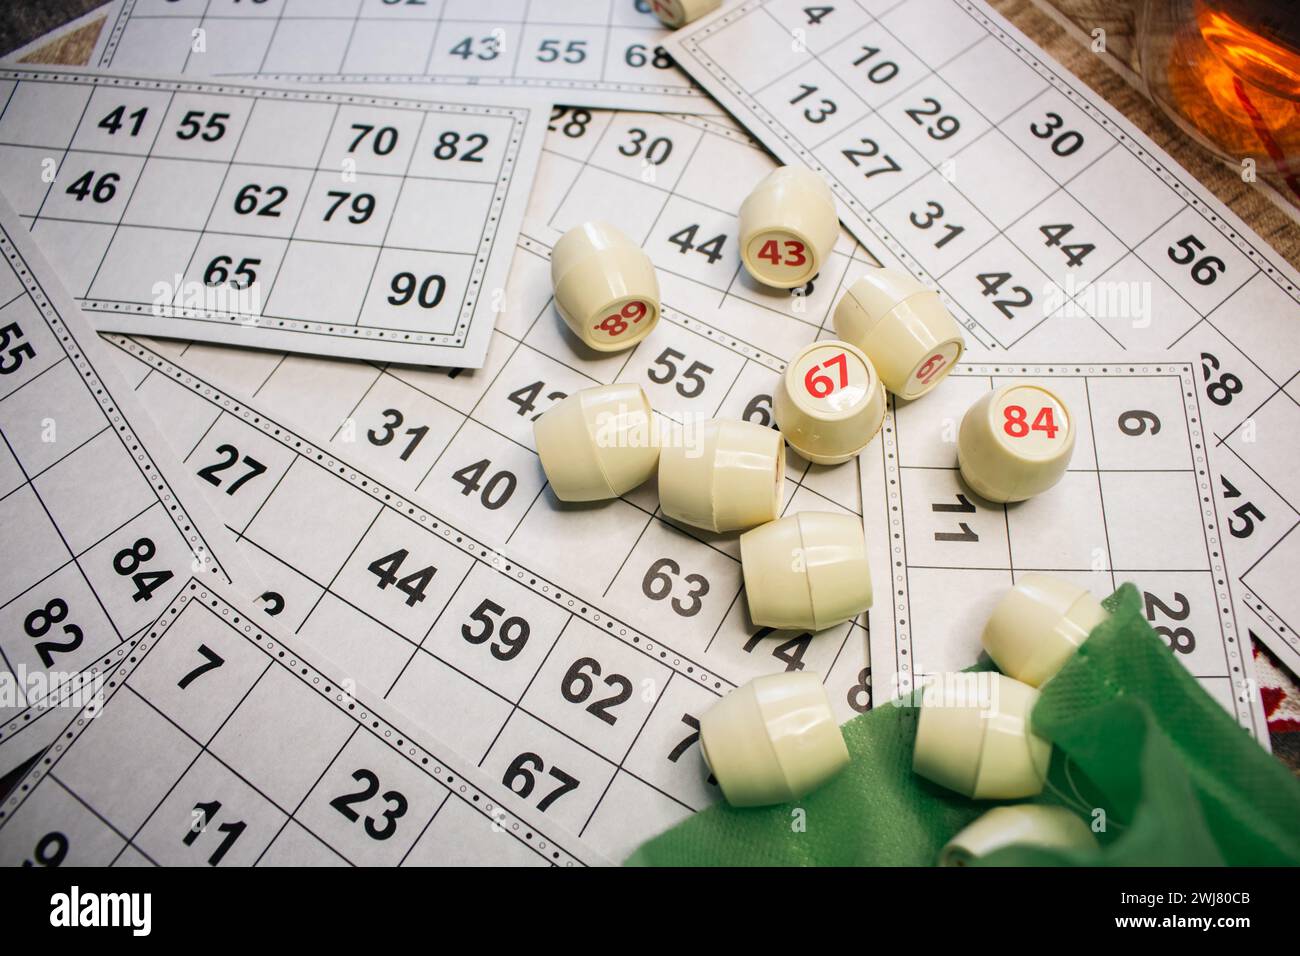 Playing lotto game. Cubes with figure on bingo card background. Nostalgia lifestyle. Table games. Retro games. Barrel with number and paper cards. Stock Photo